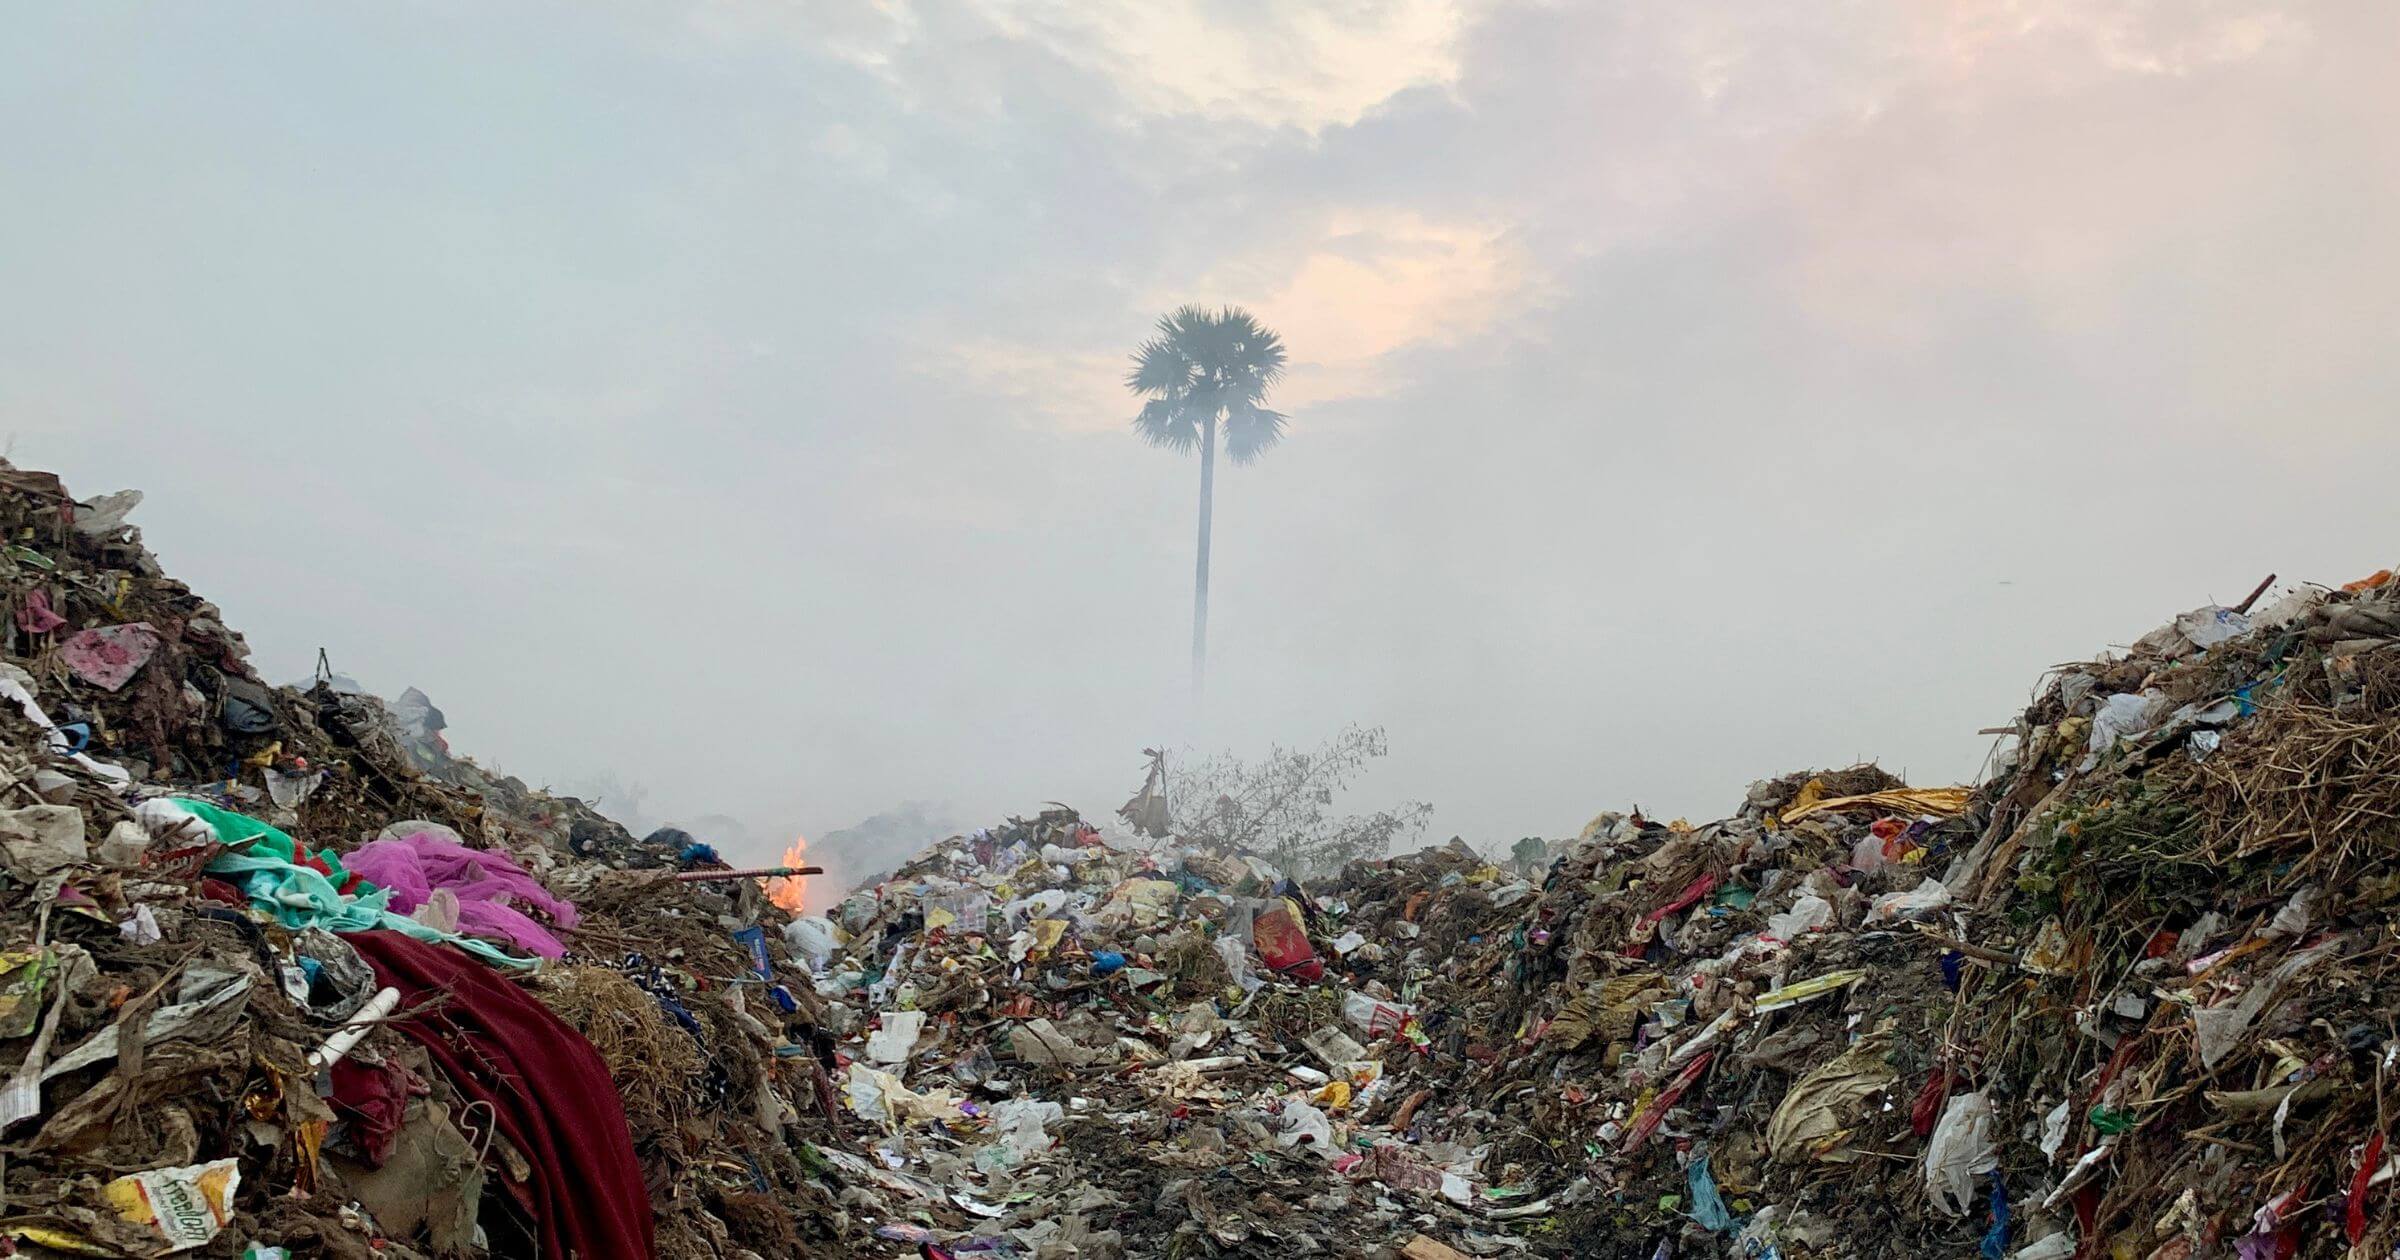 Piles of trash in a landfill with a fire in the distract and a smokey sky